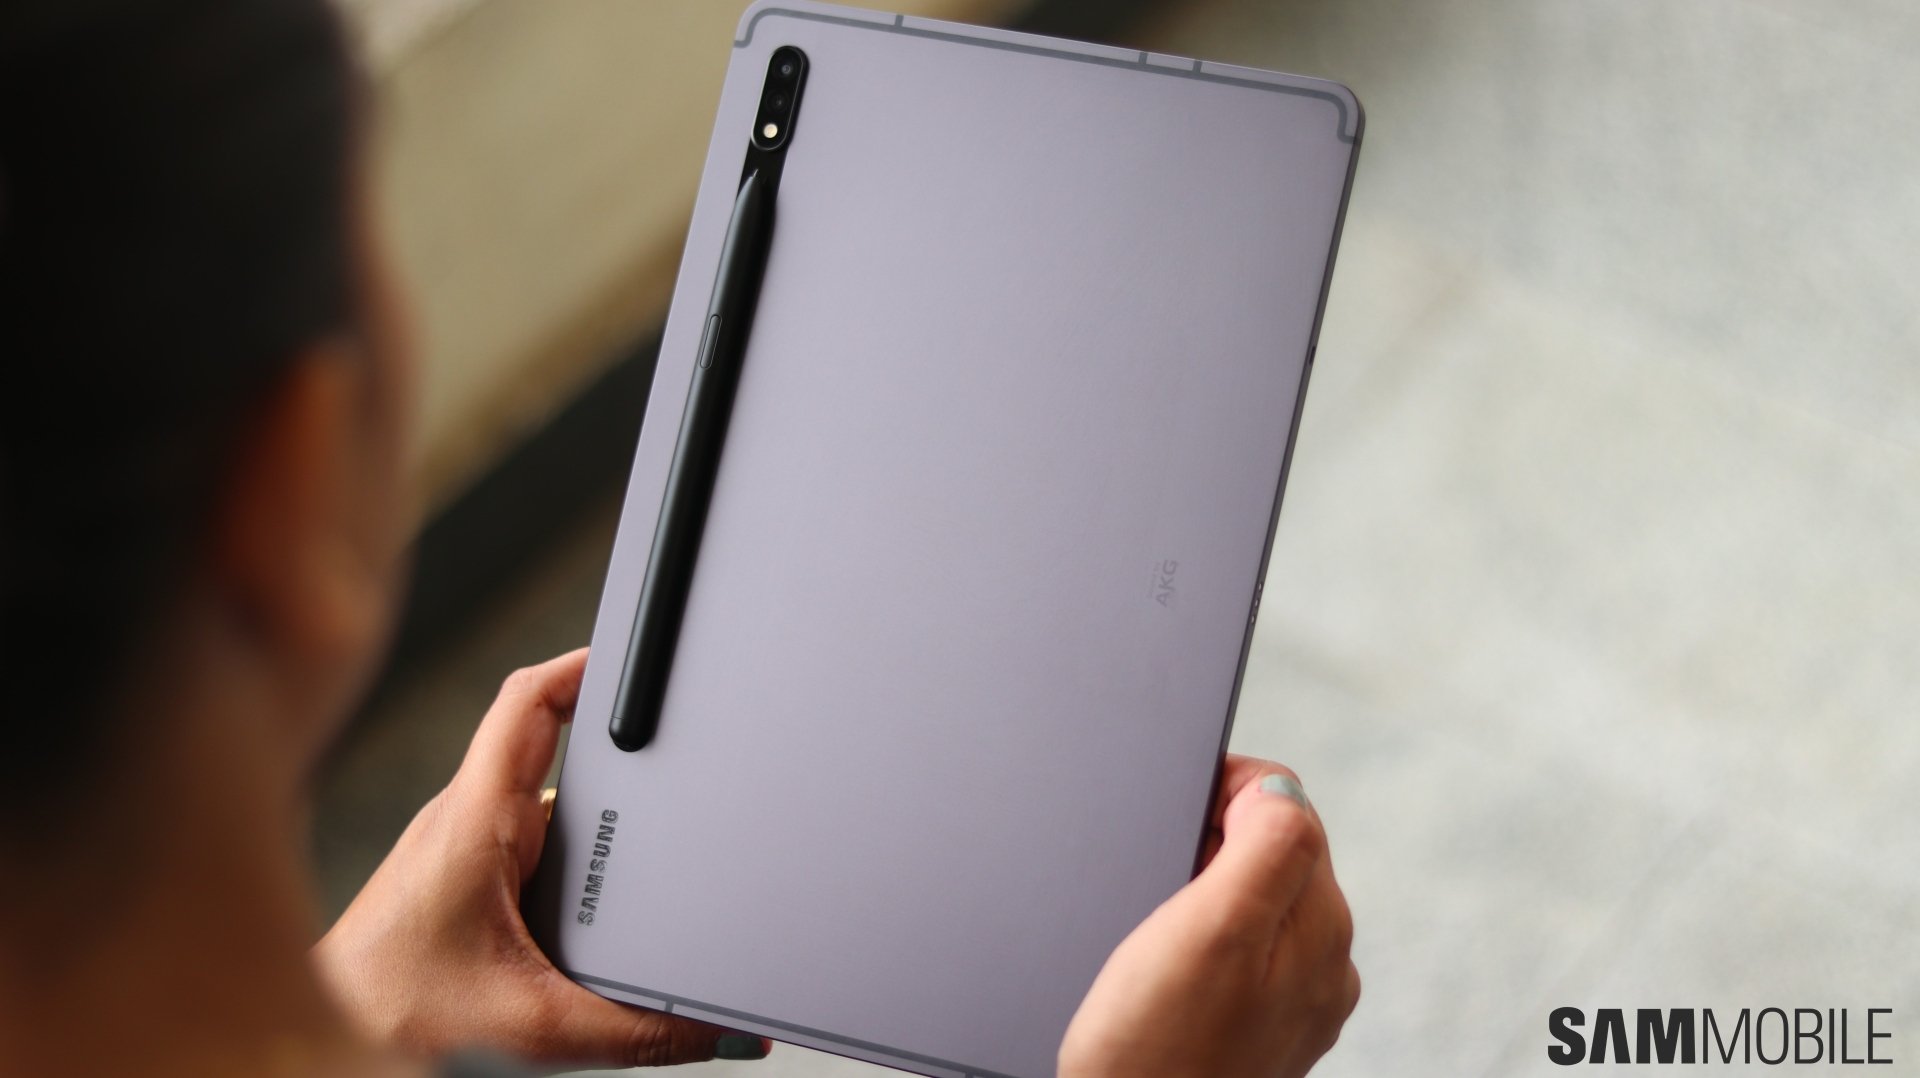 Samsung Galaxy Tab S8 Plus review: Best Android tablet despite